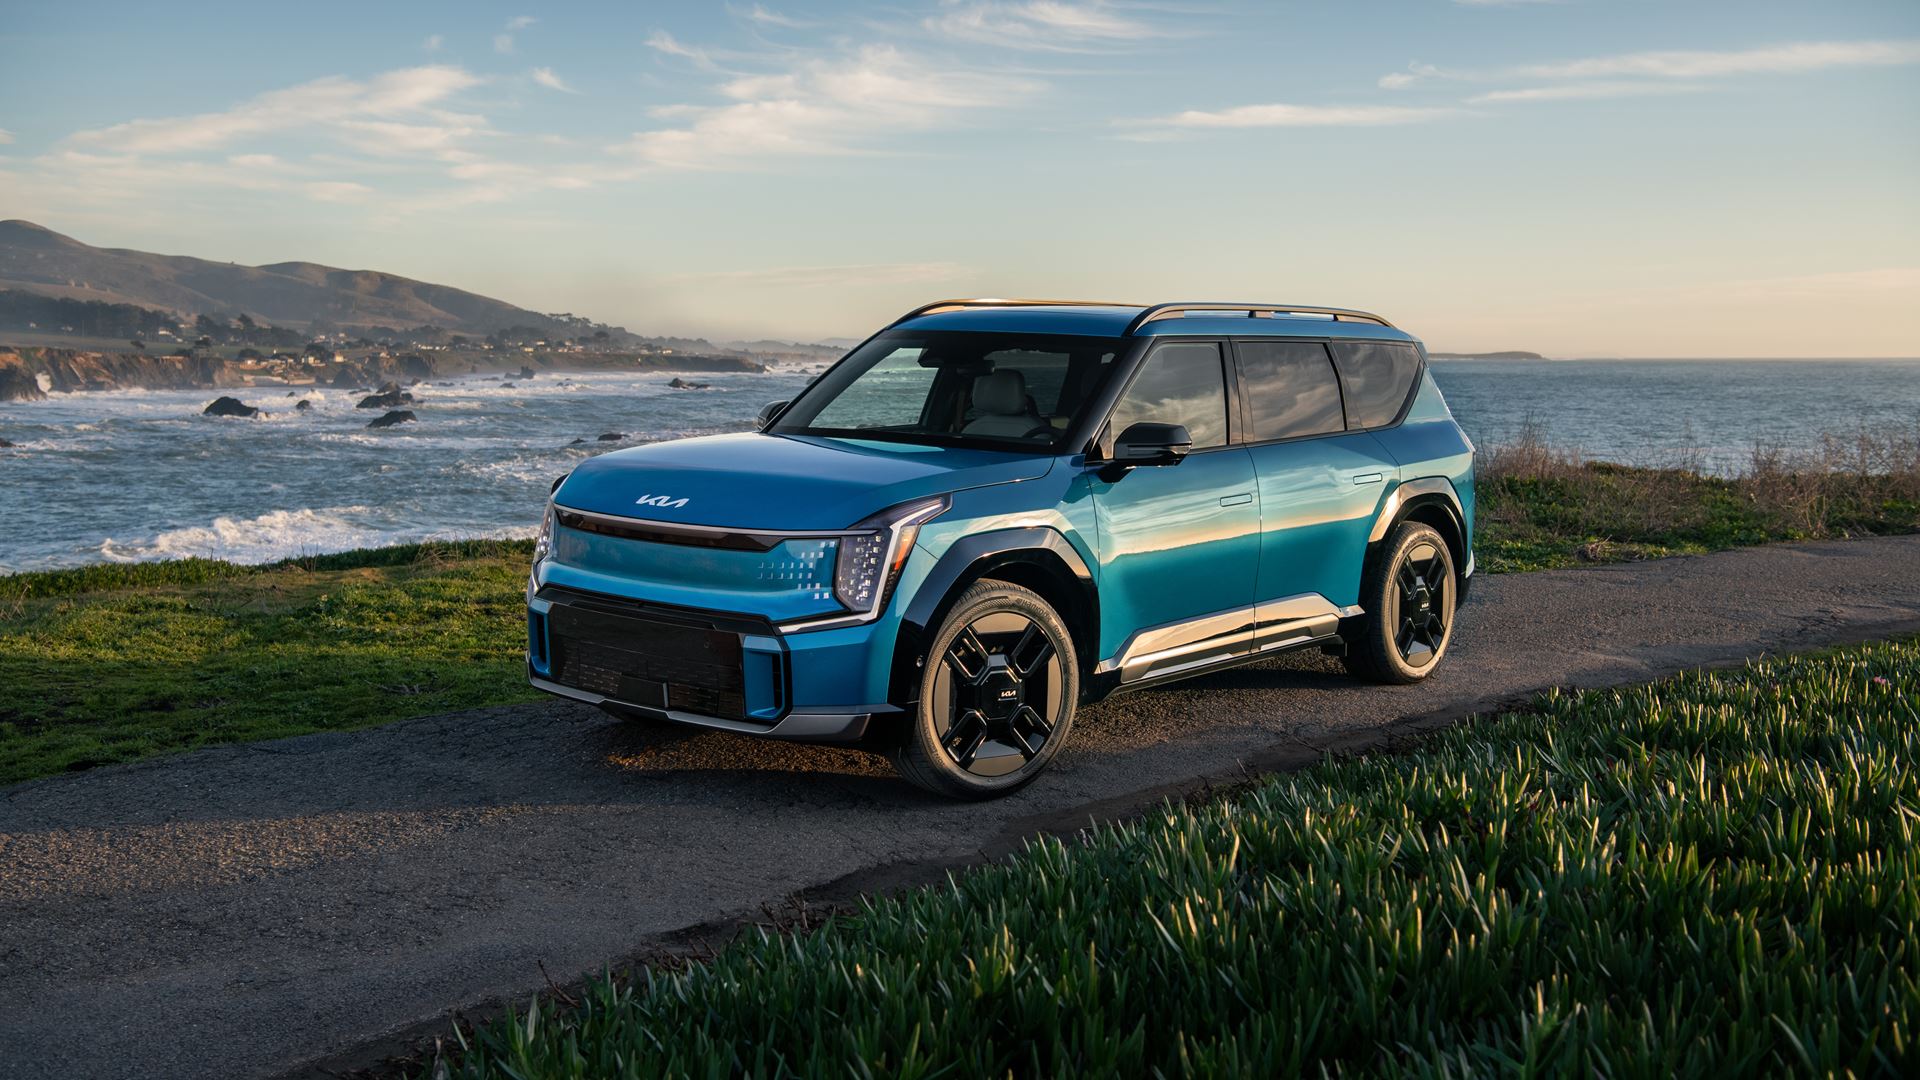 Kia EV9 named ‘Best Electric 3-row SUV’ by Parents Best Family Cars Awards